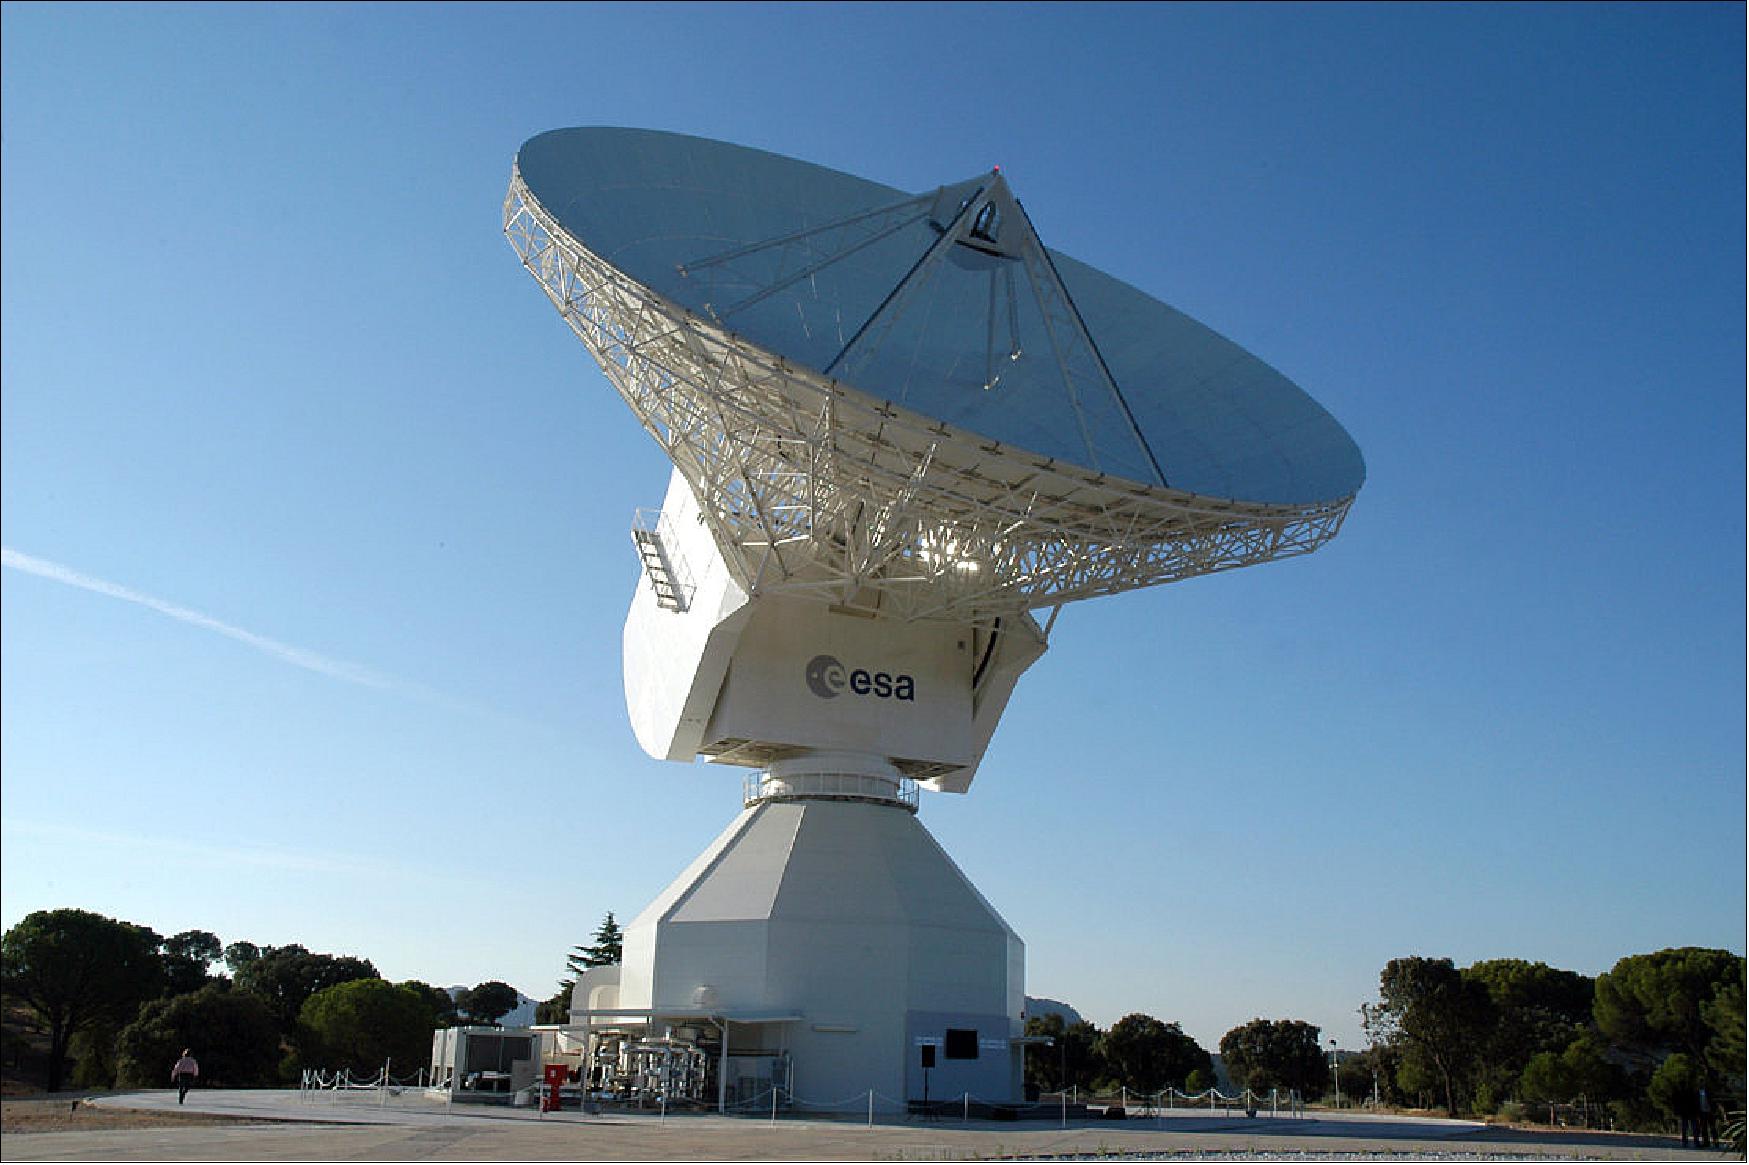 Figure 29: ESA's 35 m-diameter deep-space dish antenna, DSA-2, is located at Cebreros, near Avila, Spain. It is controlled, as part of the Estrack network, from ESOC (European Space Operations Center) in Darmstadt, Germany (image credit: ESA)